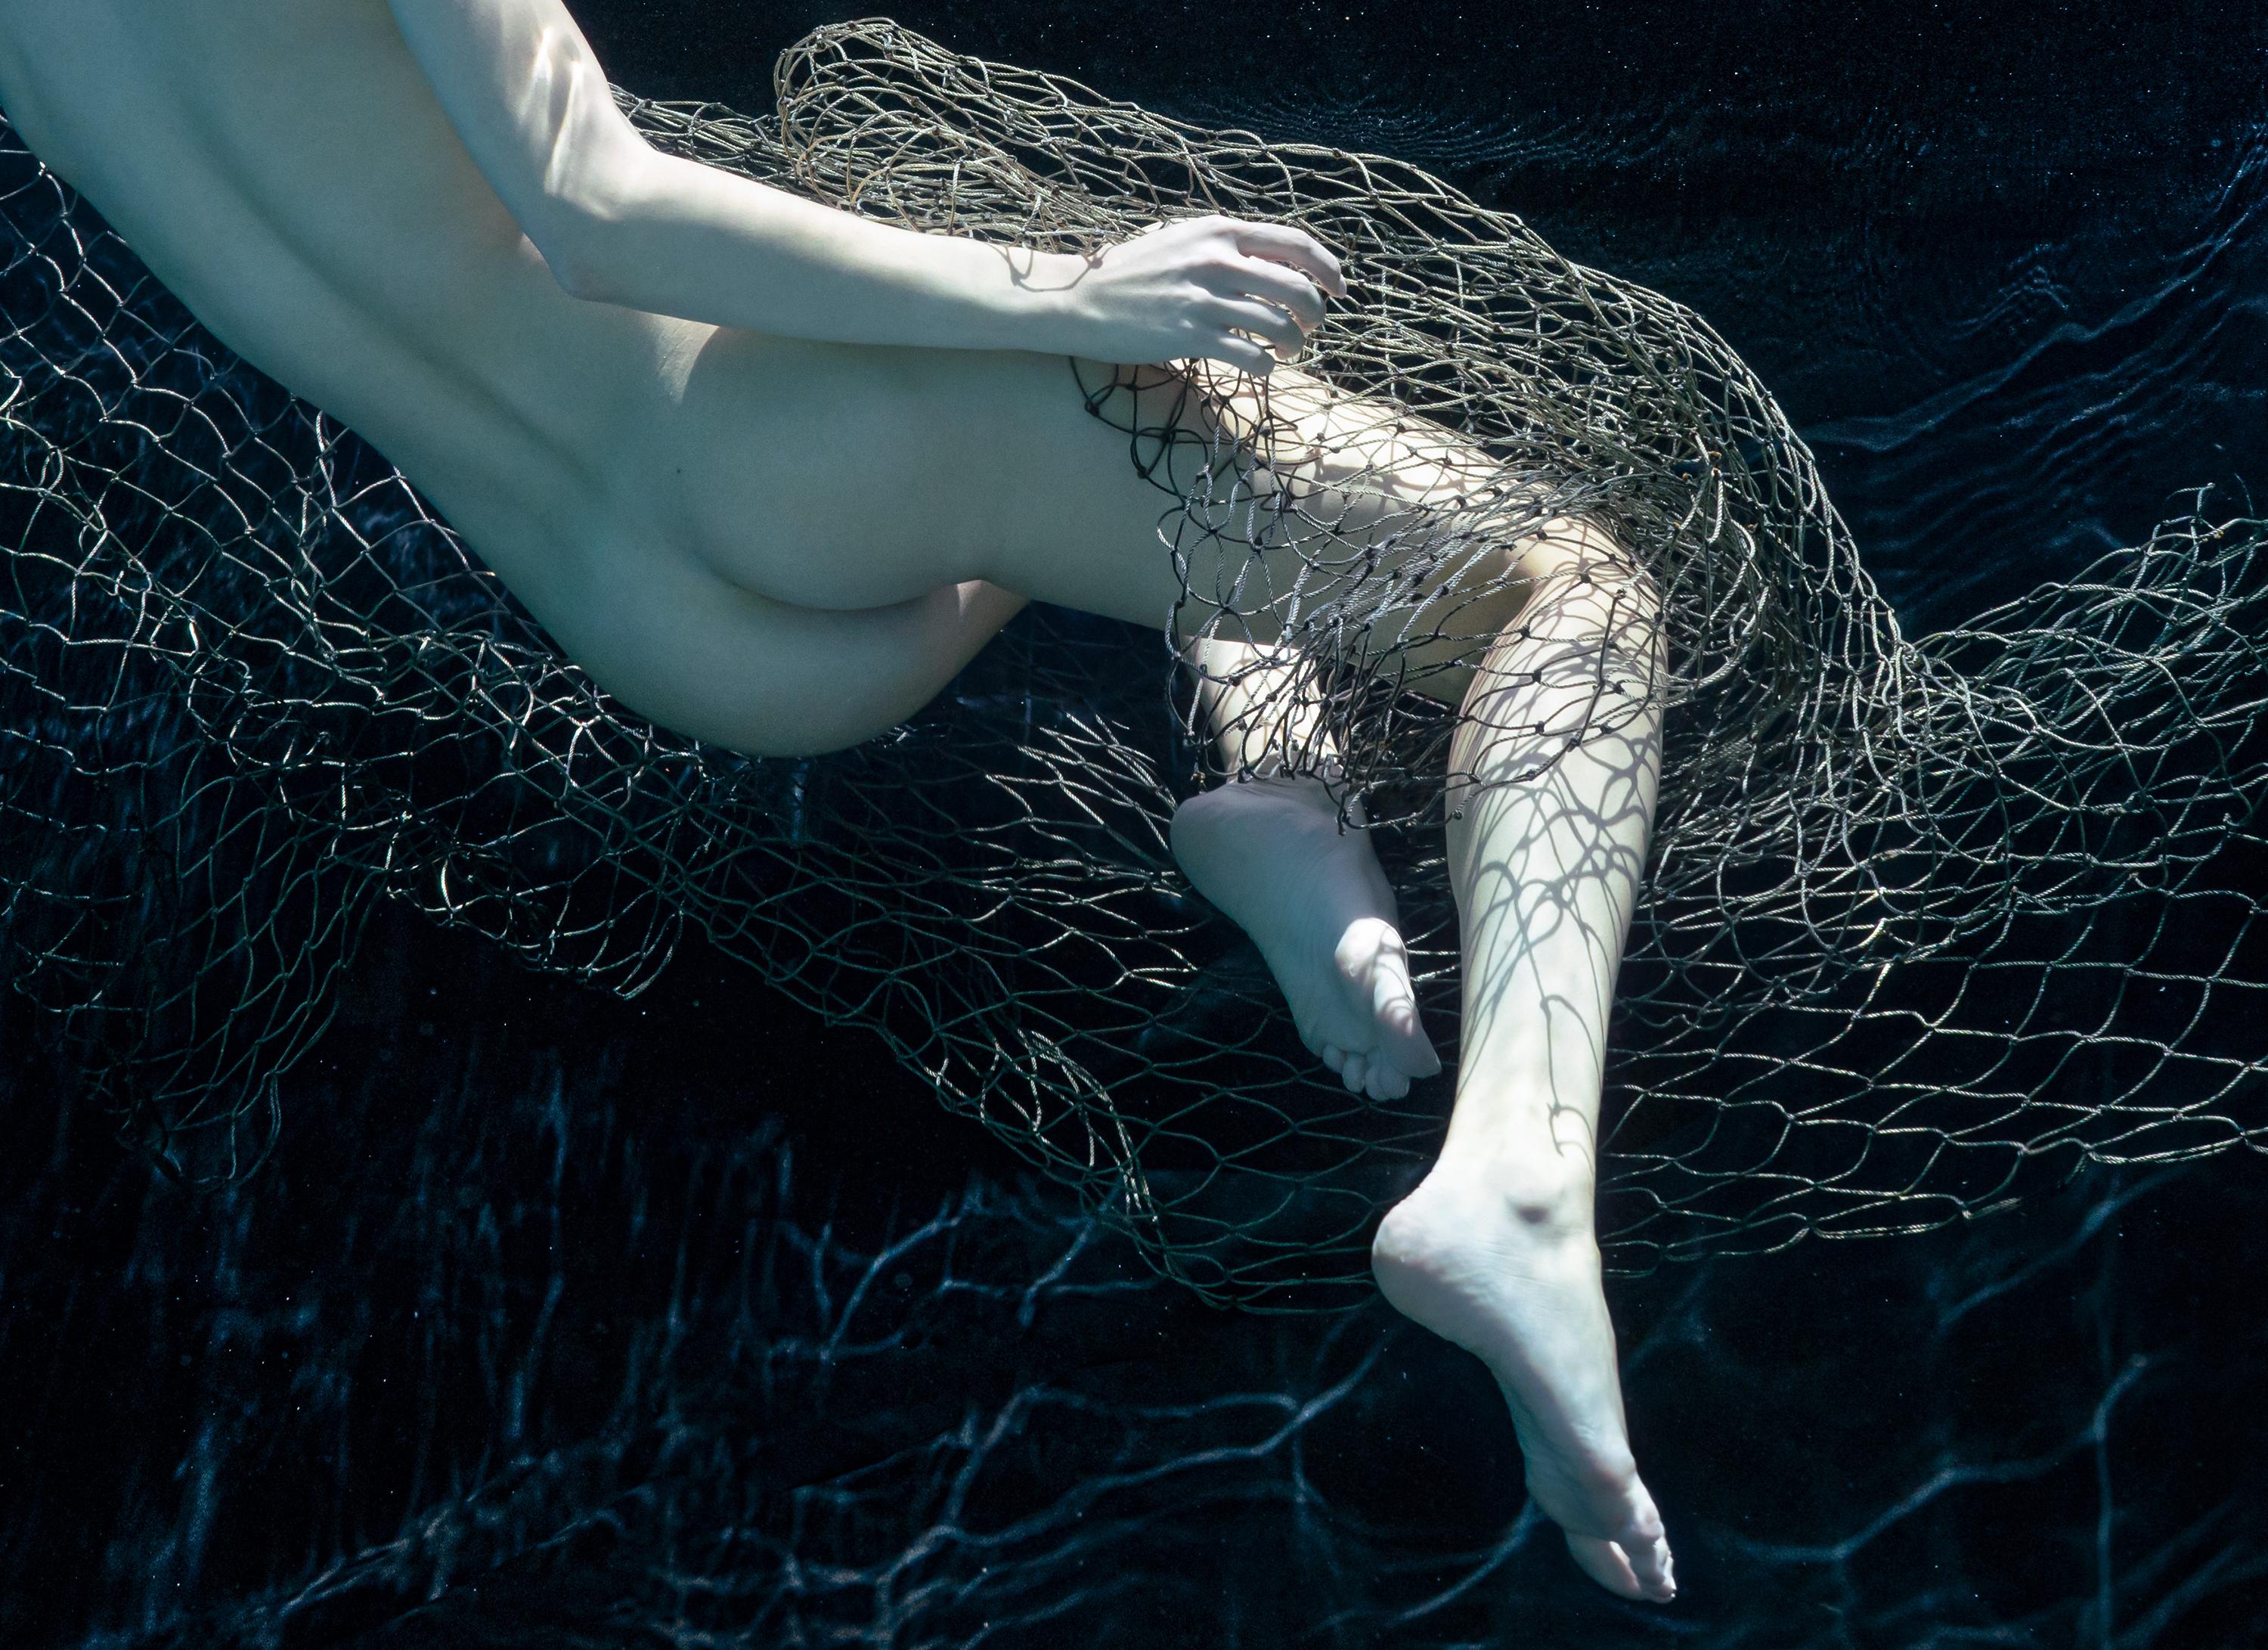 An underwater almost monochrome photograph of a naked young women wrapped in fishing net.

Original digital archival pigment print signed by the artist.
Limited edition of 24. 
Paper size: 25